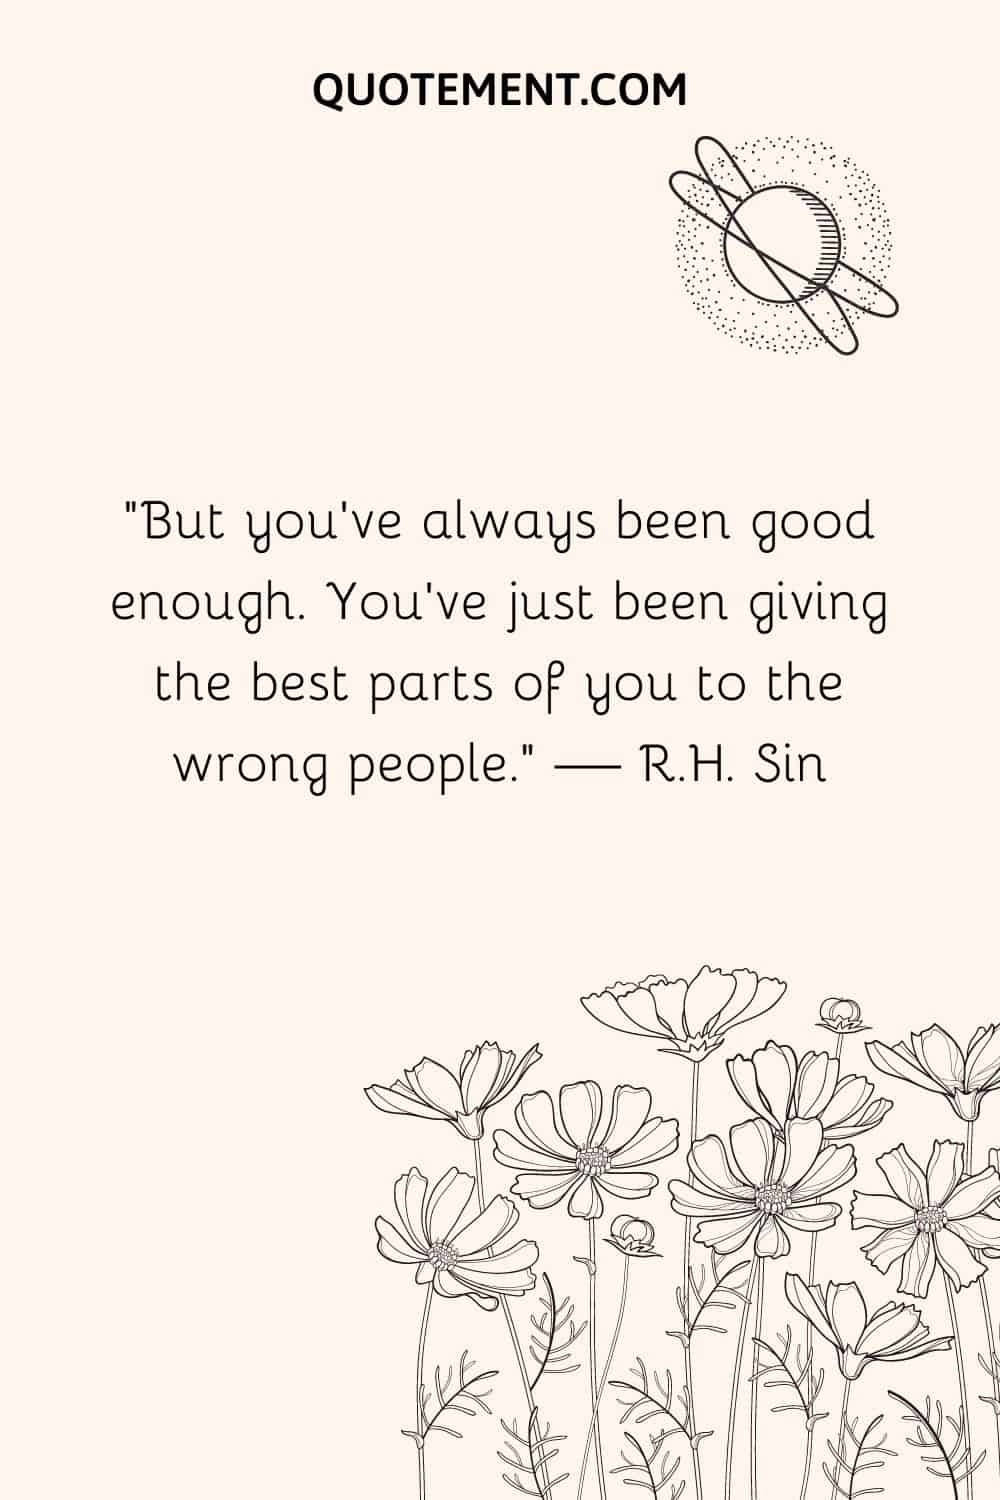 But you've always been good enough. You've just been giving the best parts of you to the wrong people